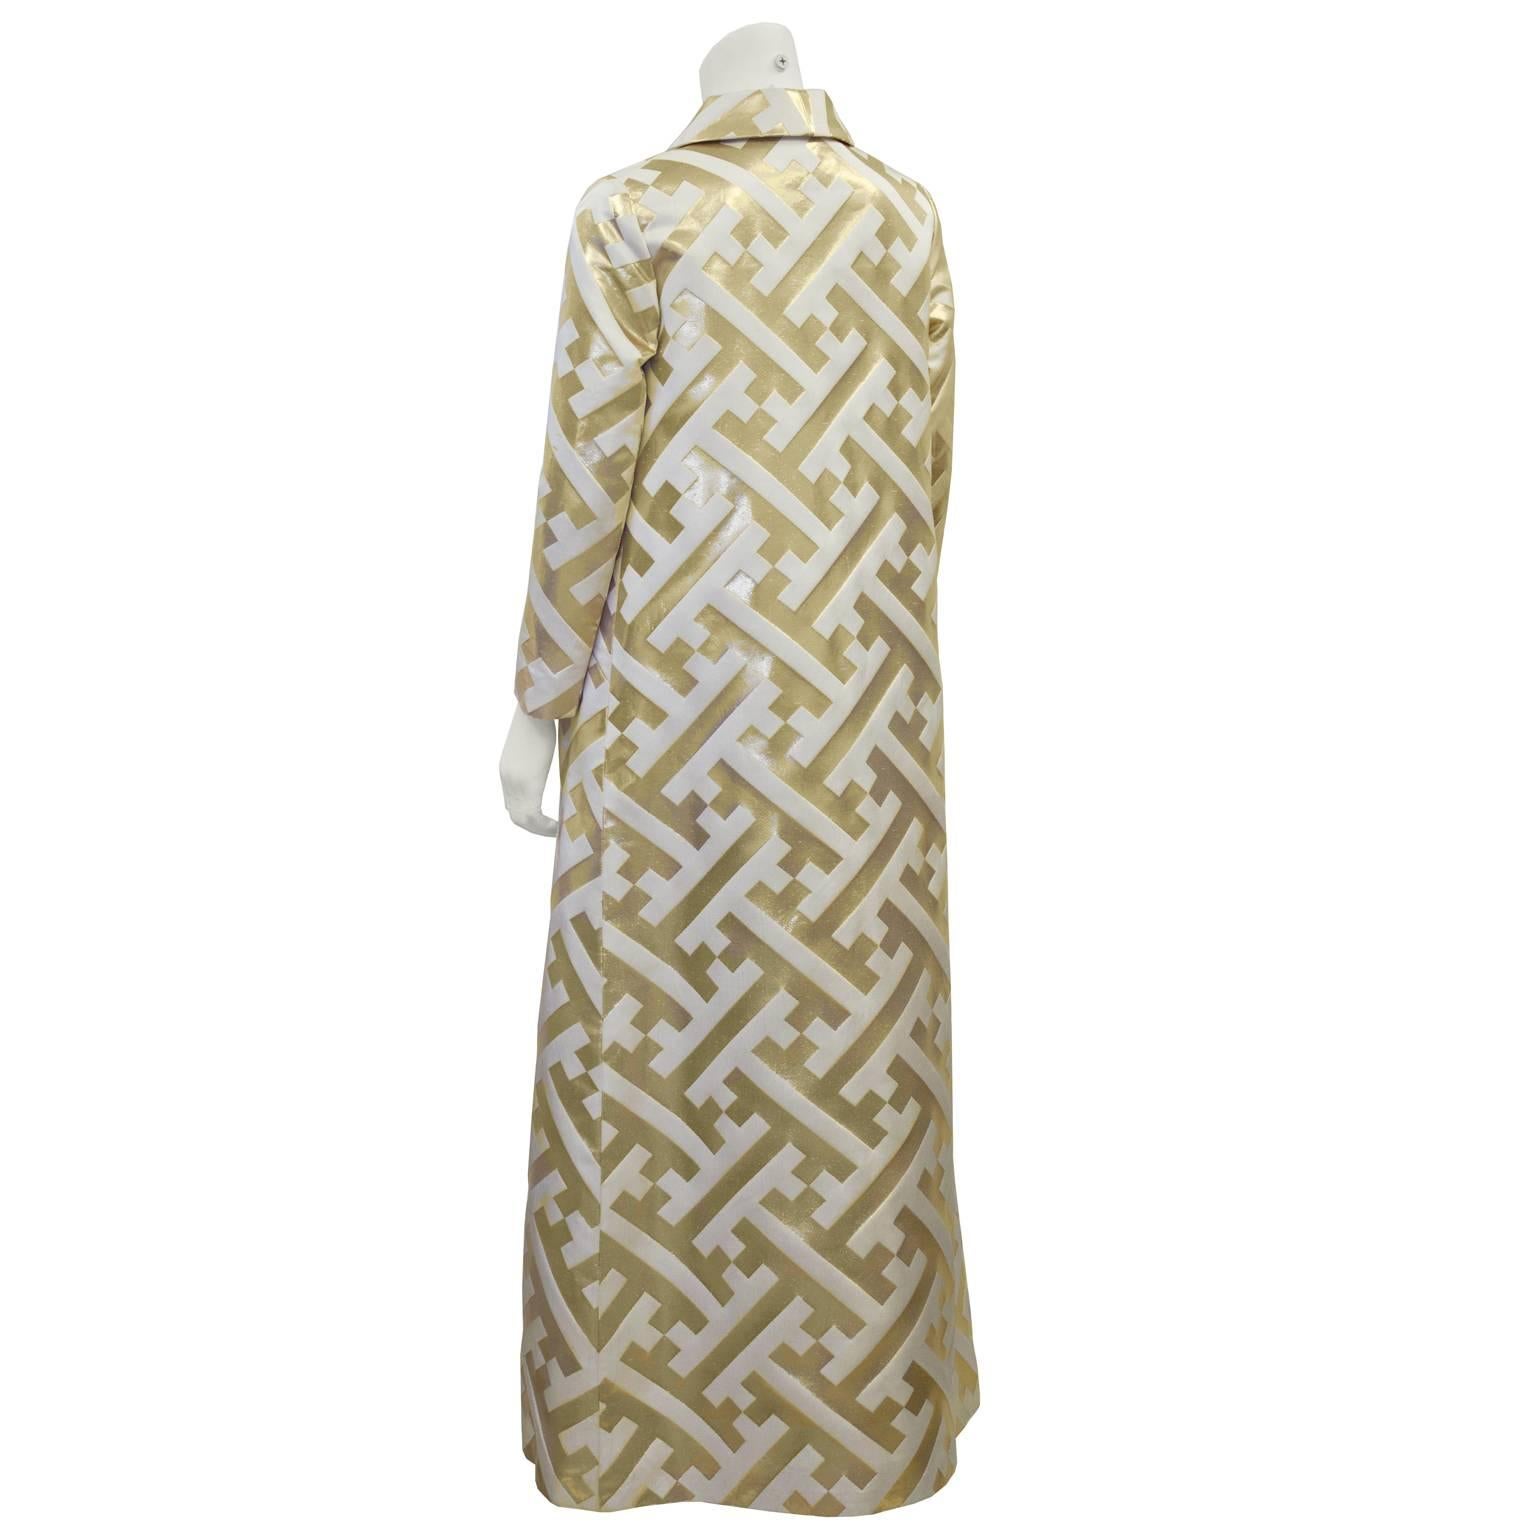 Dazzle in this anonymous gold and white evening coat dating from the 1960's. Floor length, A-line cut, with notched lapels and a front fabric button closure. Features unique all-over pattern in white and a shiny gold. The perfect coat for a black